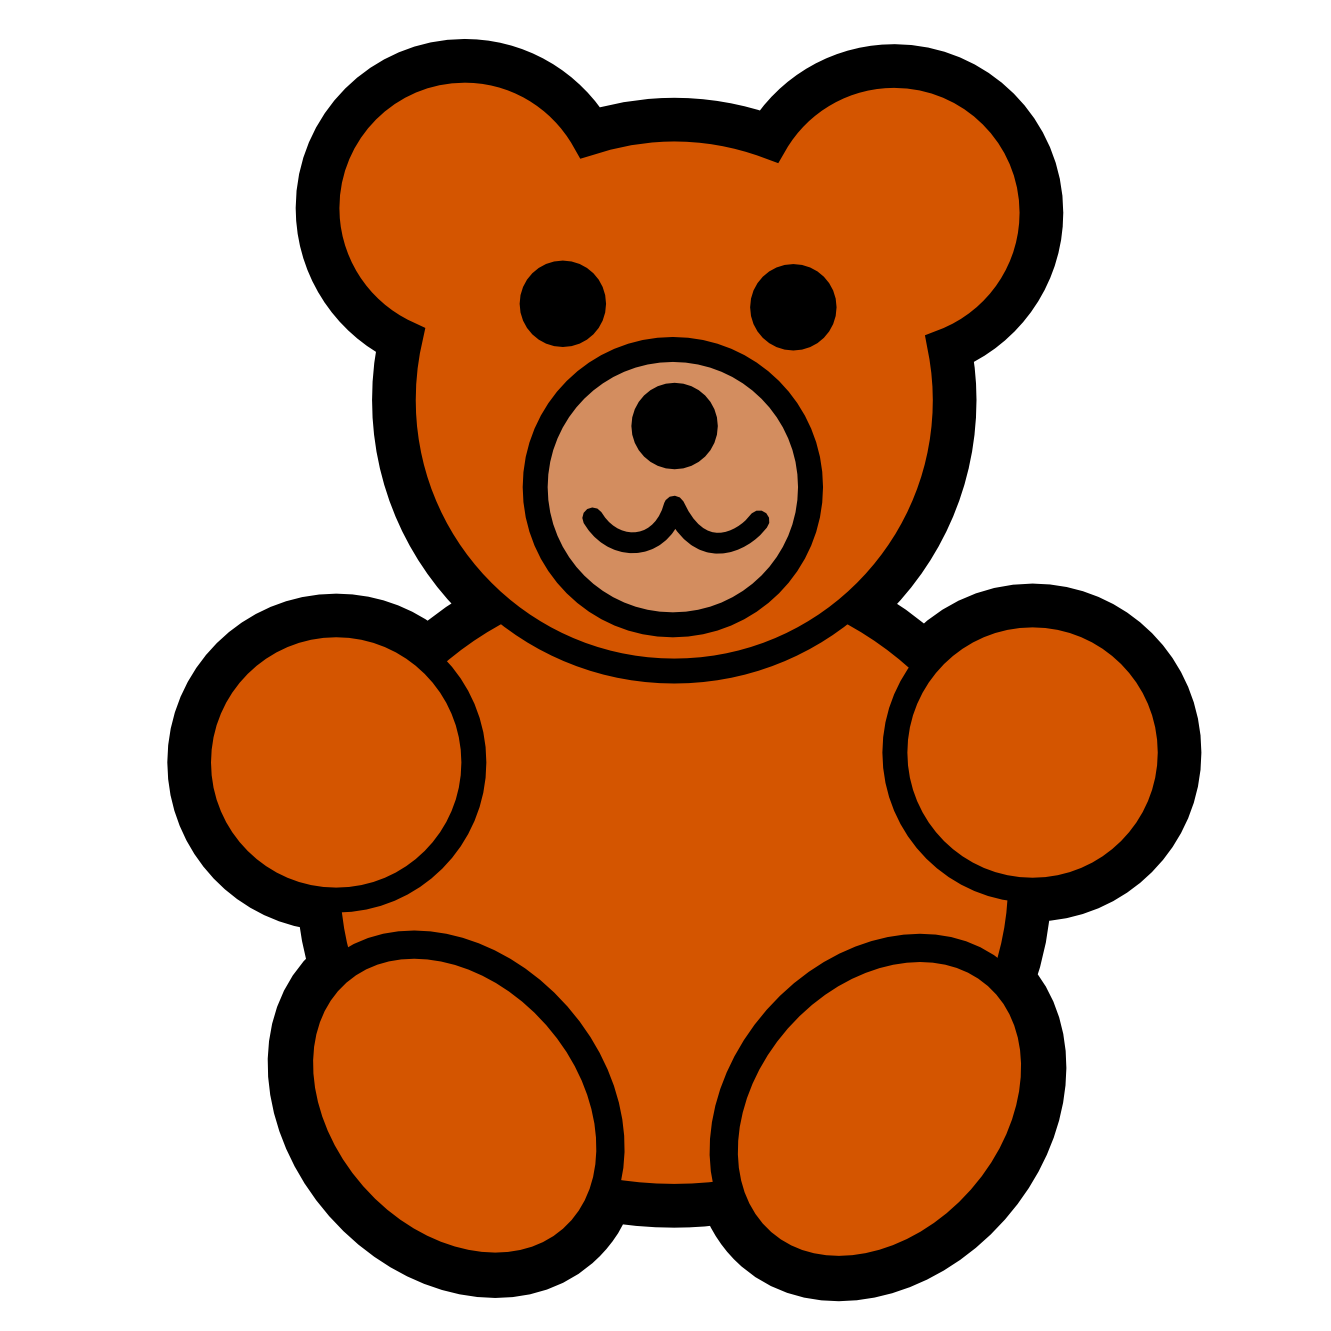 Cute bear pink teddy bear clipart free clipart images